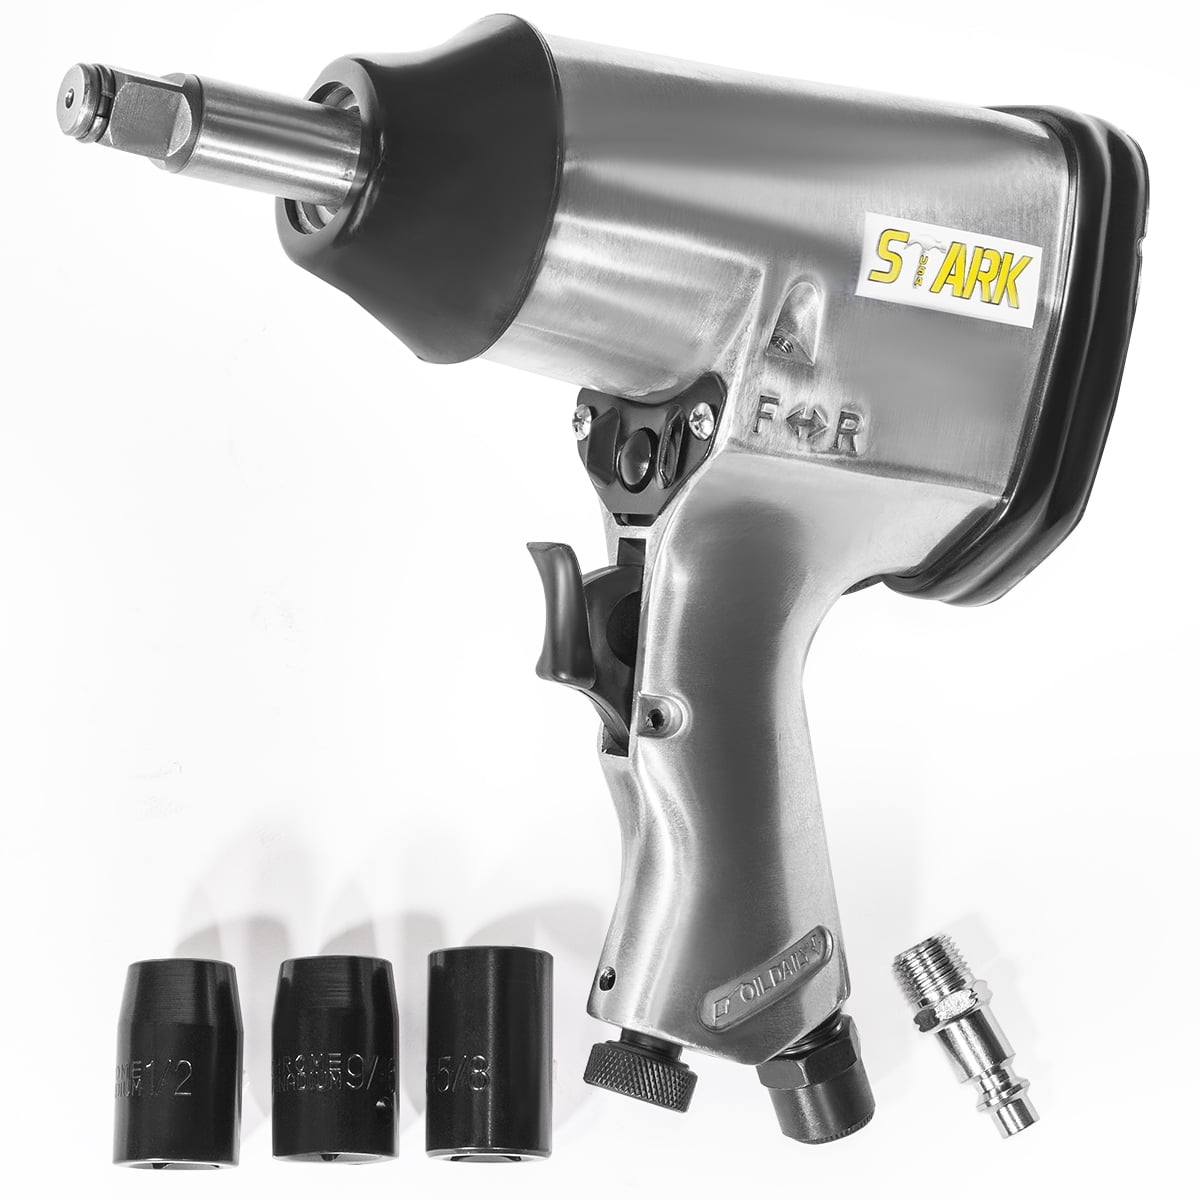 1/2" DR DRIVE AIR POWERED HAND POWER SOCKET RATCHET IMPACT WRENCH TOOL 